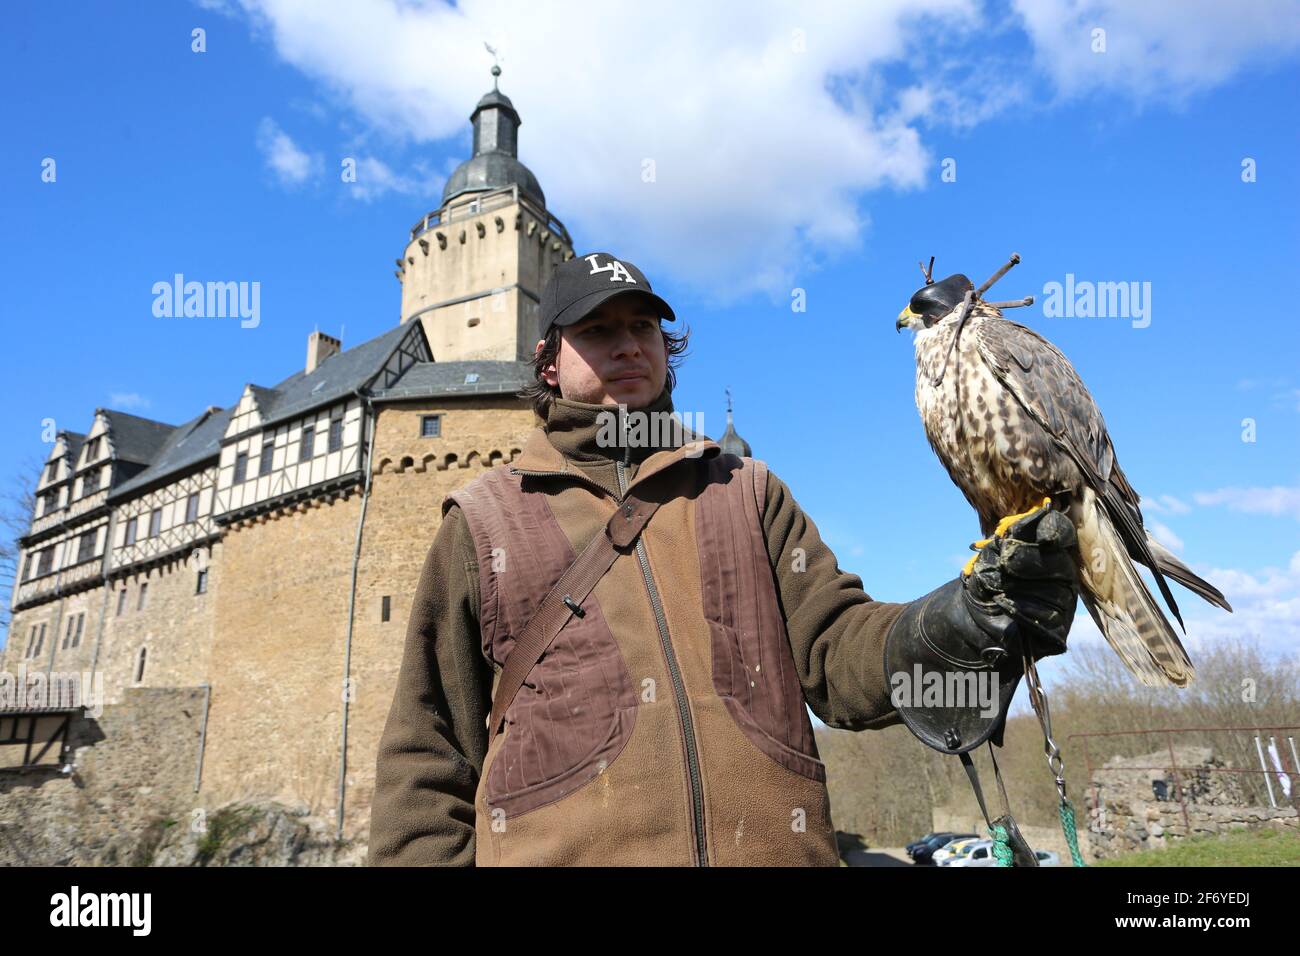 03 April 2021, Saxony-Anhalt, Pansfelde: A falcon sits on the arm of falconer Peter Öchlschäger during a falconry demonstration in the castle grounds. Falkenstein Castle in the southern Harz region is open to visitors again for the first time after a long break due to the Corona pandemic. After booking by telephone, visitors can tour the castle grounds and experience a falconry demonstration. The castle is located above the Selketal. The fortified complex was built at the beginning of the 12th century and passed as a fiefdom to the noble Asseburg family in the 15th century. Photo: Matthias Bei Stock Photo